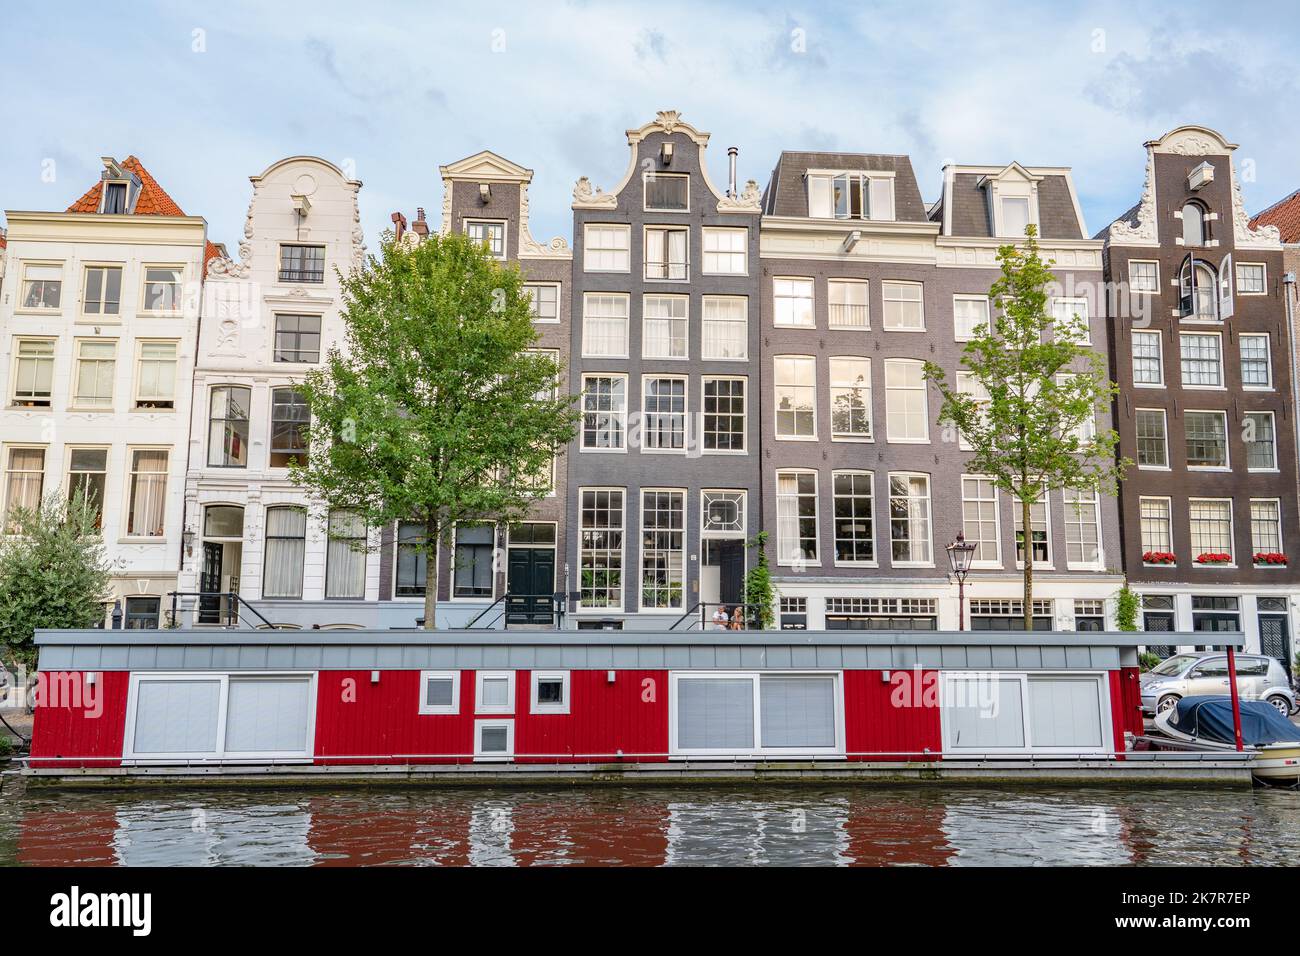 Beautiful canal houses stacked in a row in Amsterdam Stock Photo